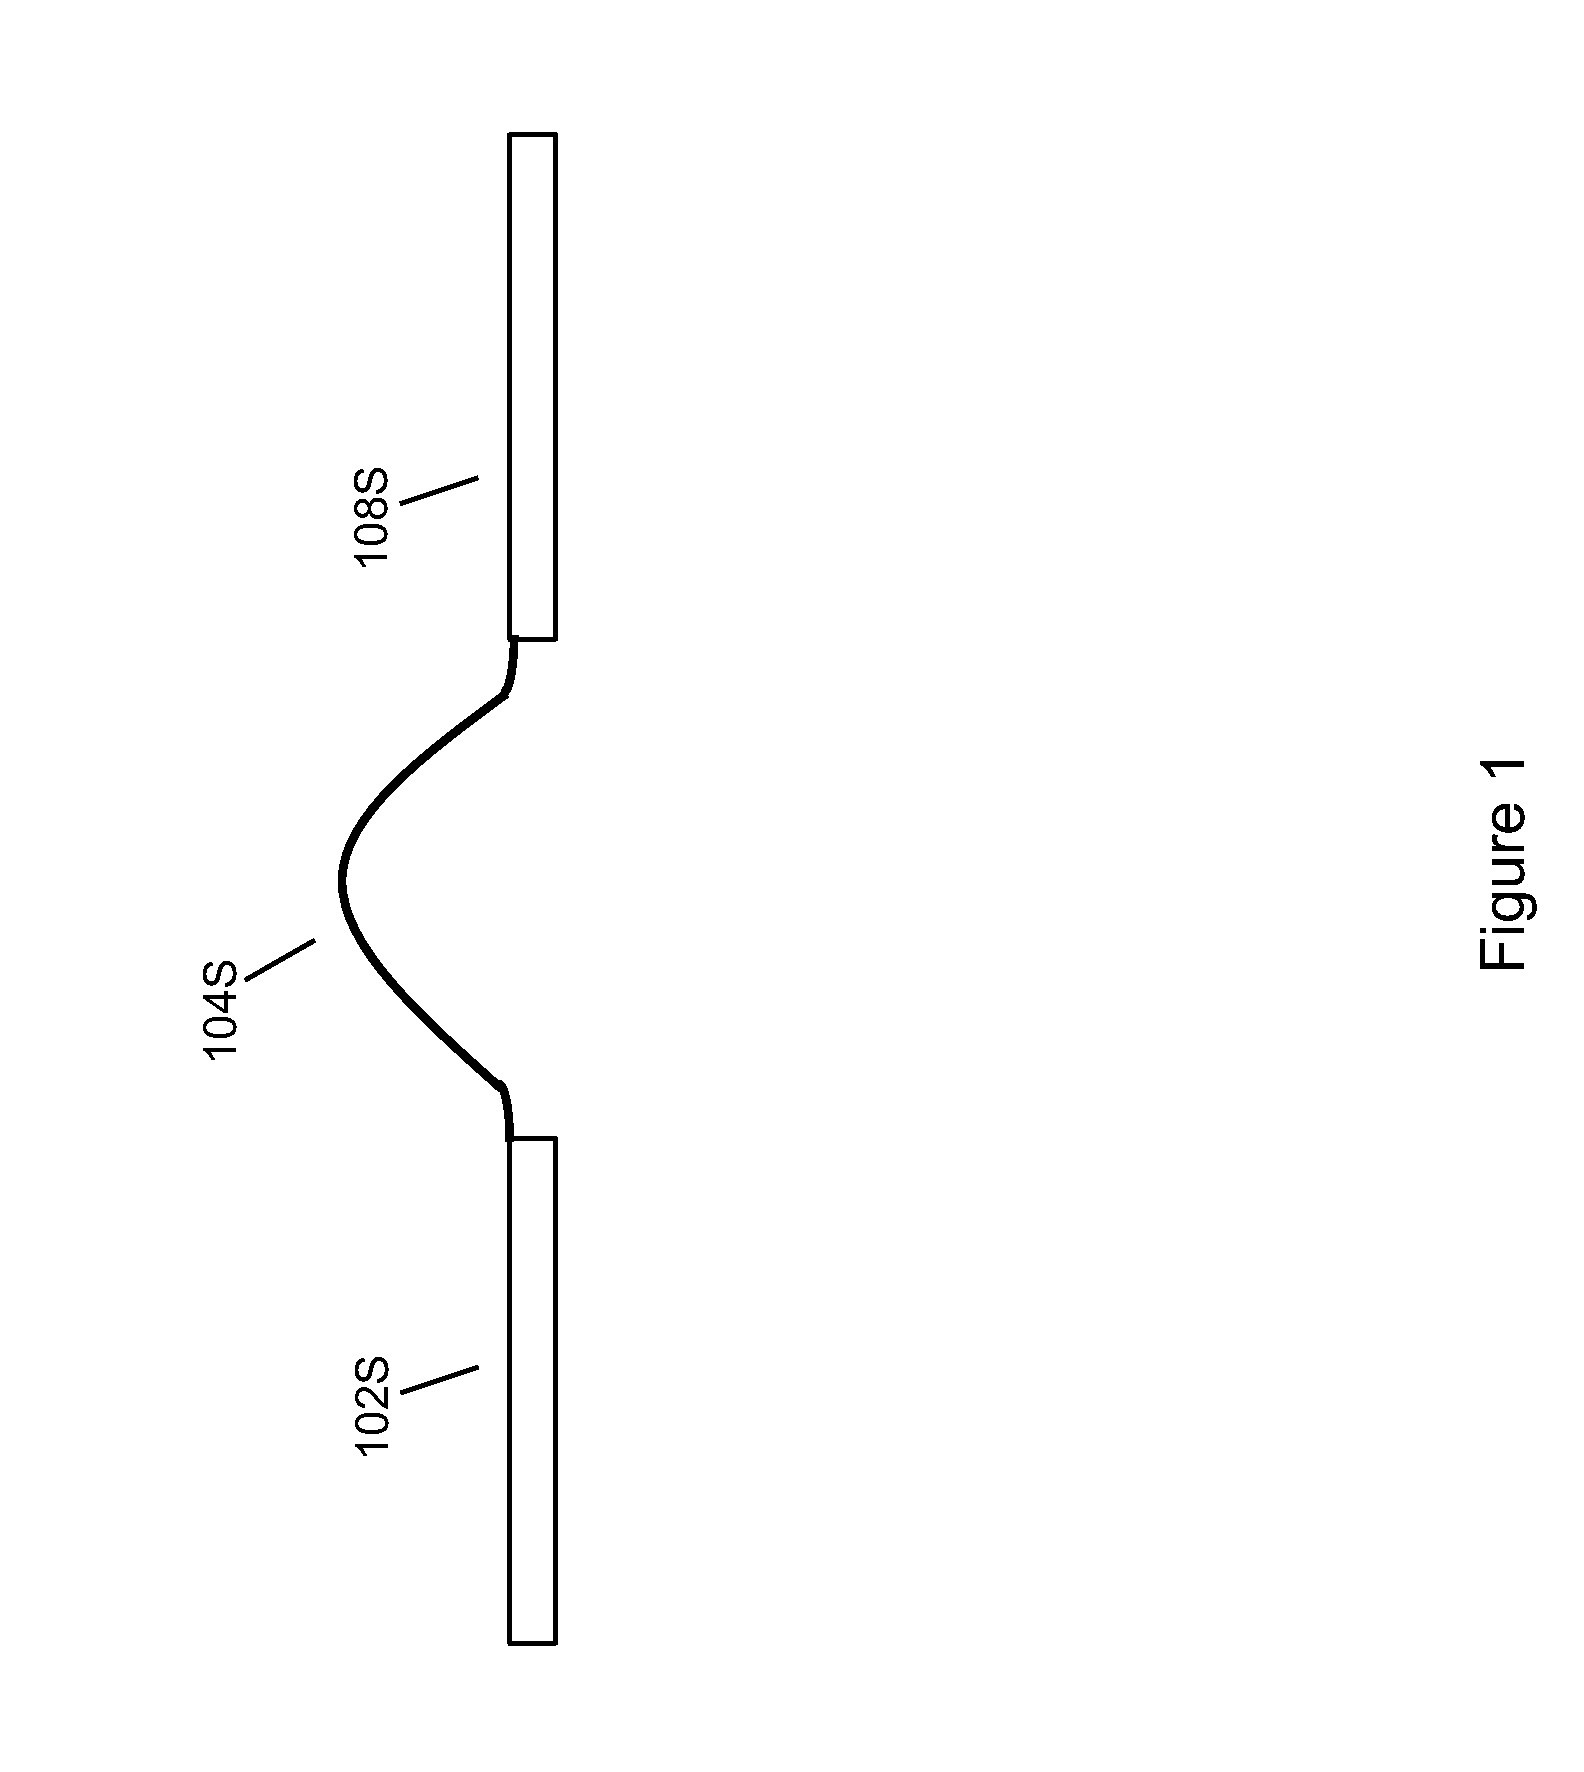 Systems, devices, and methods utilizing stretchable electronics to measure tire or road surface conditions